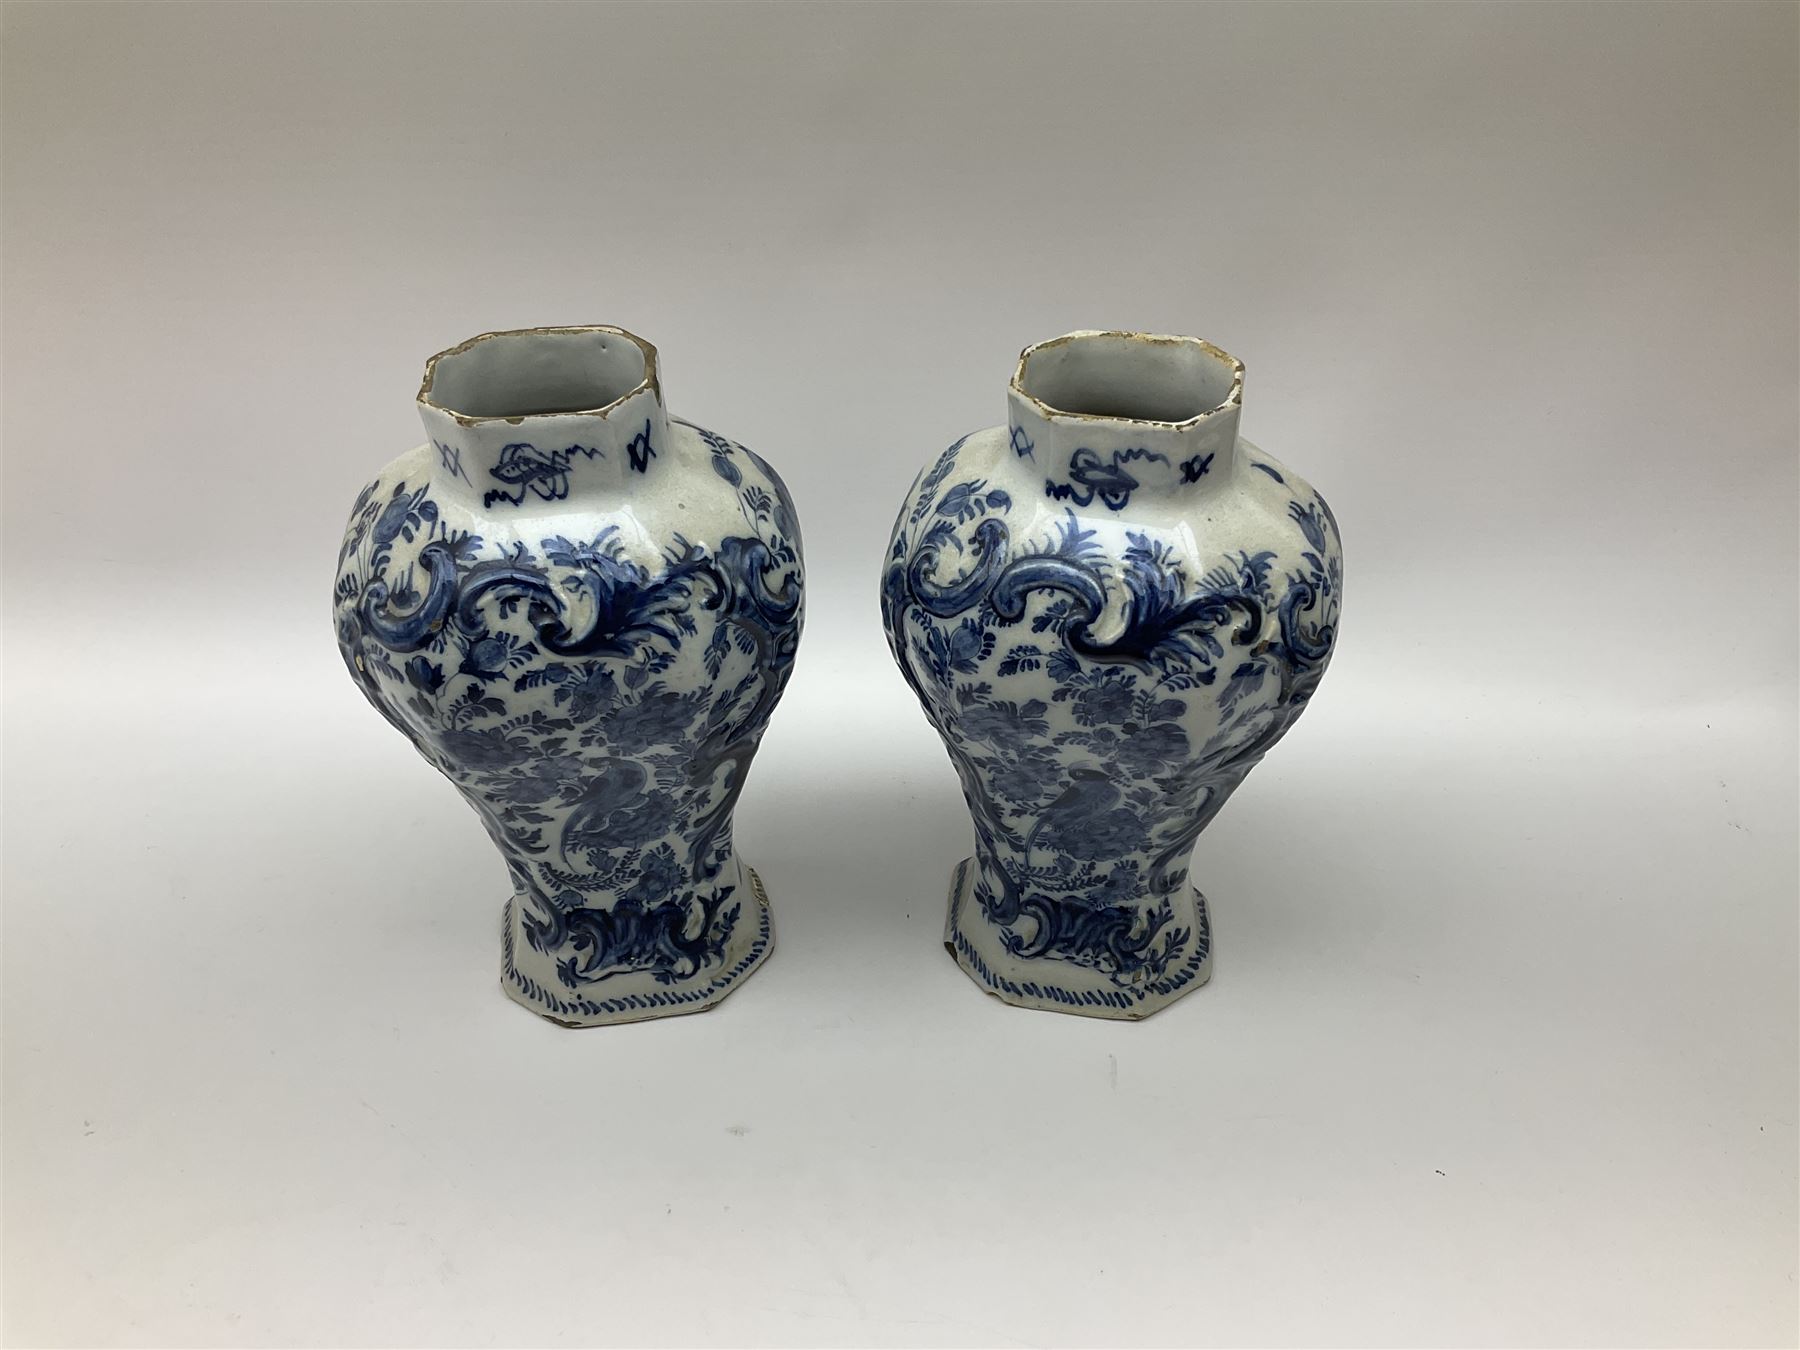 Pair of 19th century Delft blue and white vases - Image 2 of 16